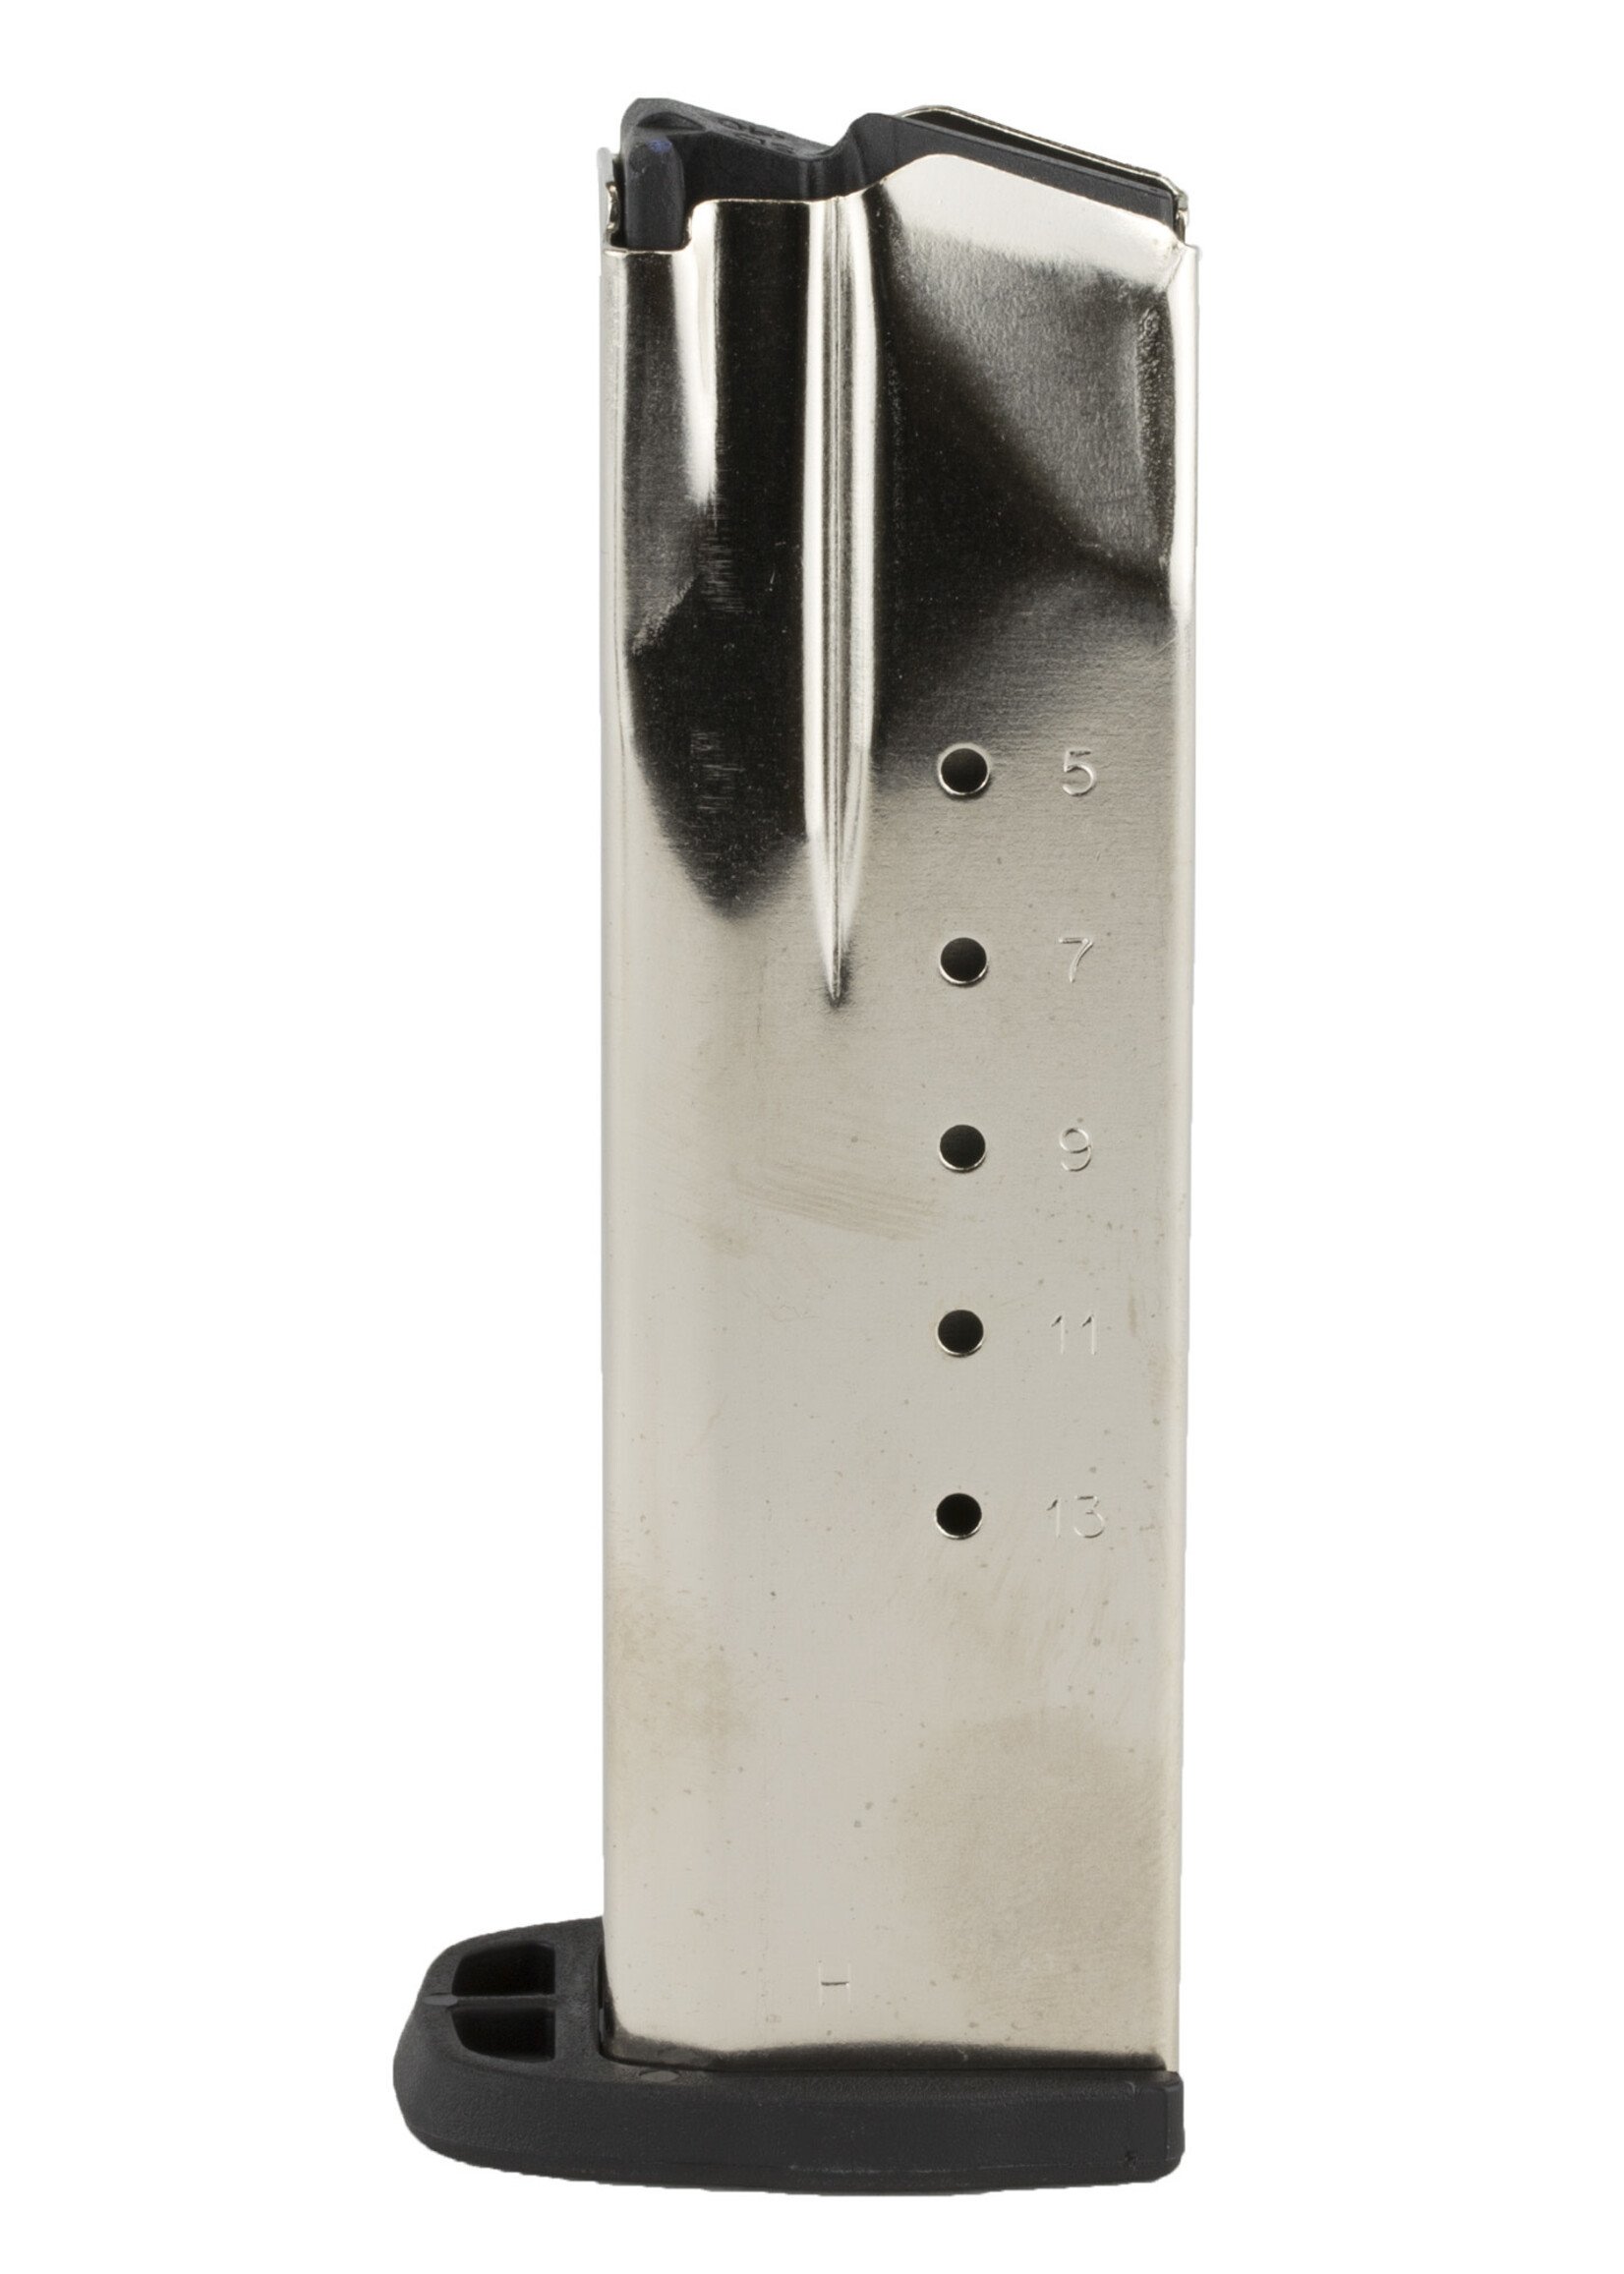 Smith & Wesson Smith & Wesson Magazine 40 S&W 14 Rounds, Fits SD Stainless, MFG# 199270000 UPC# 022188144314